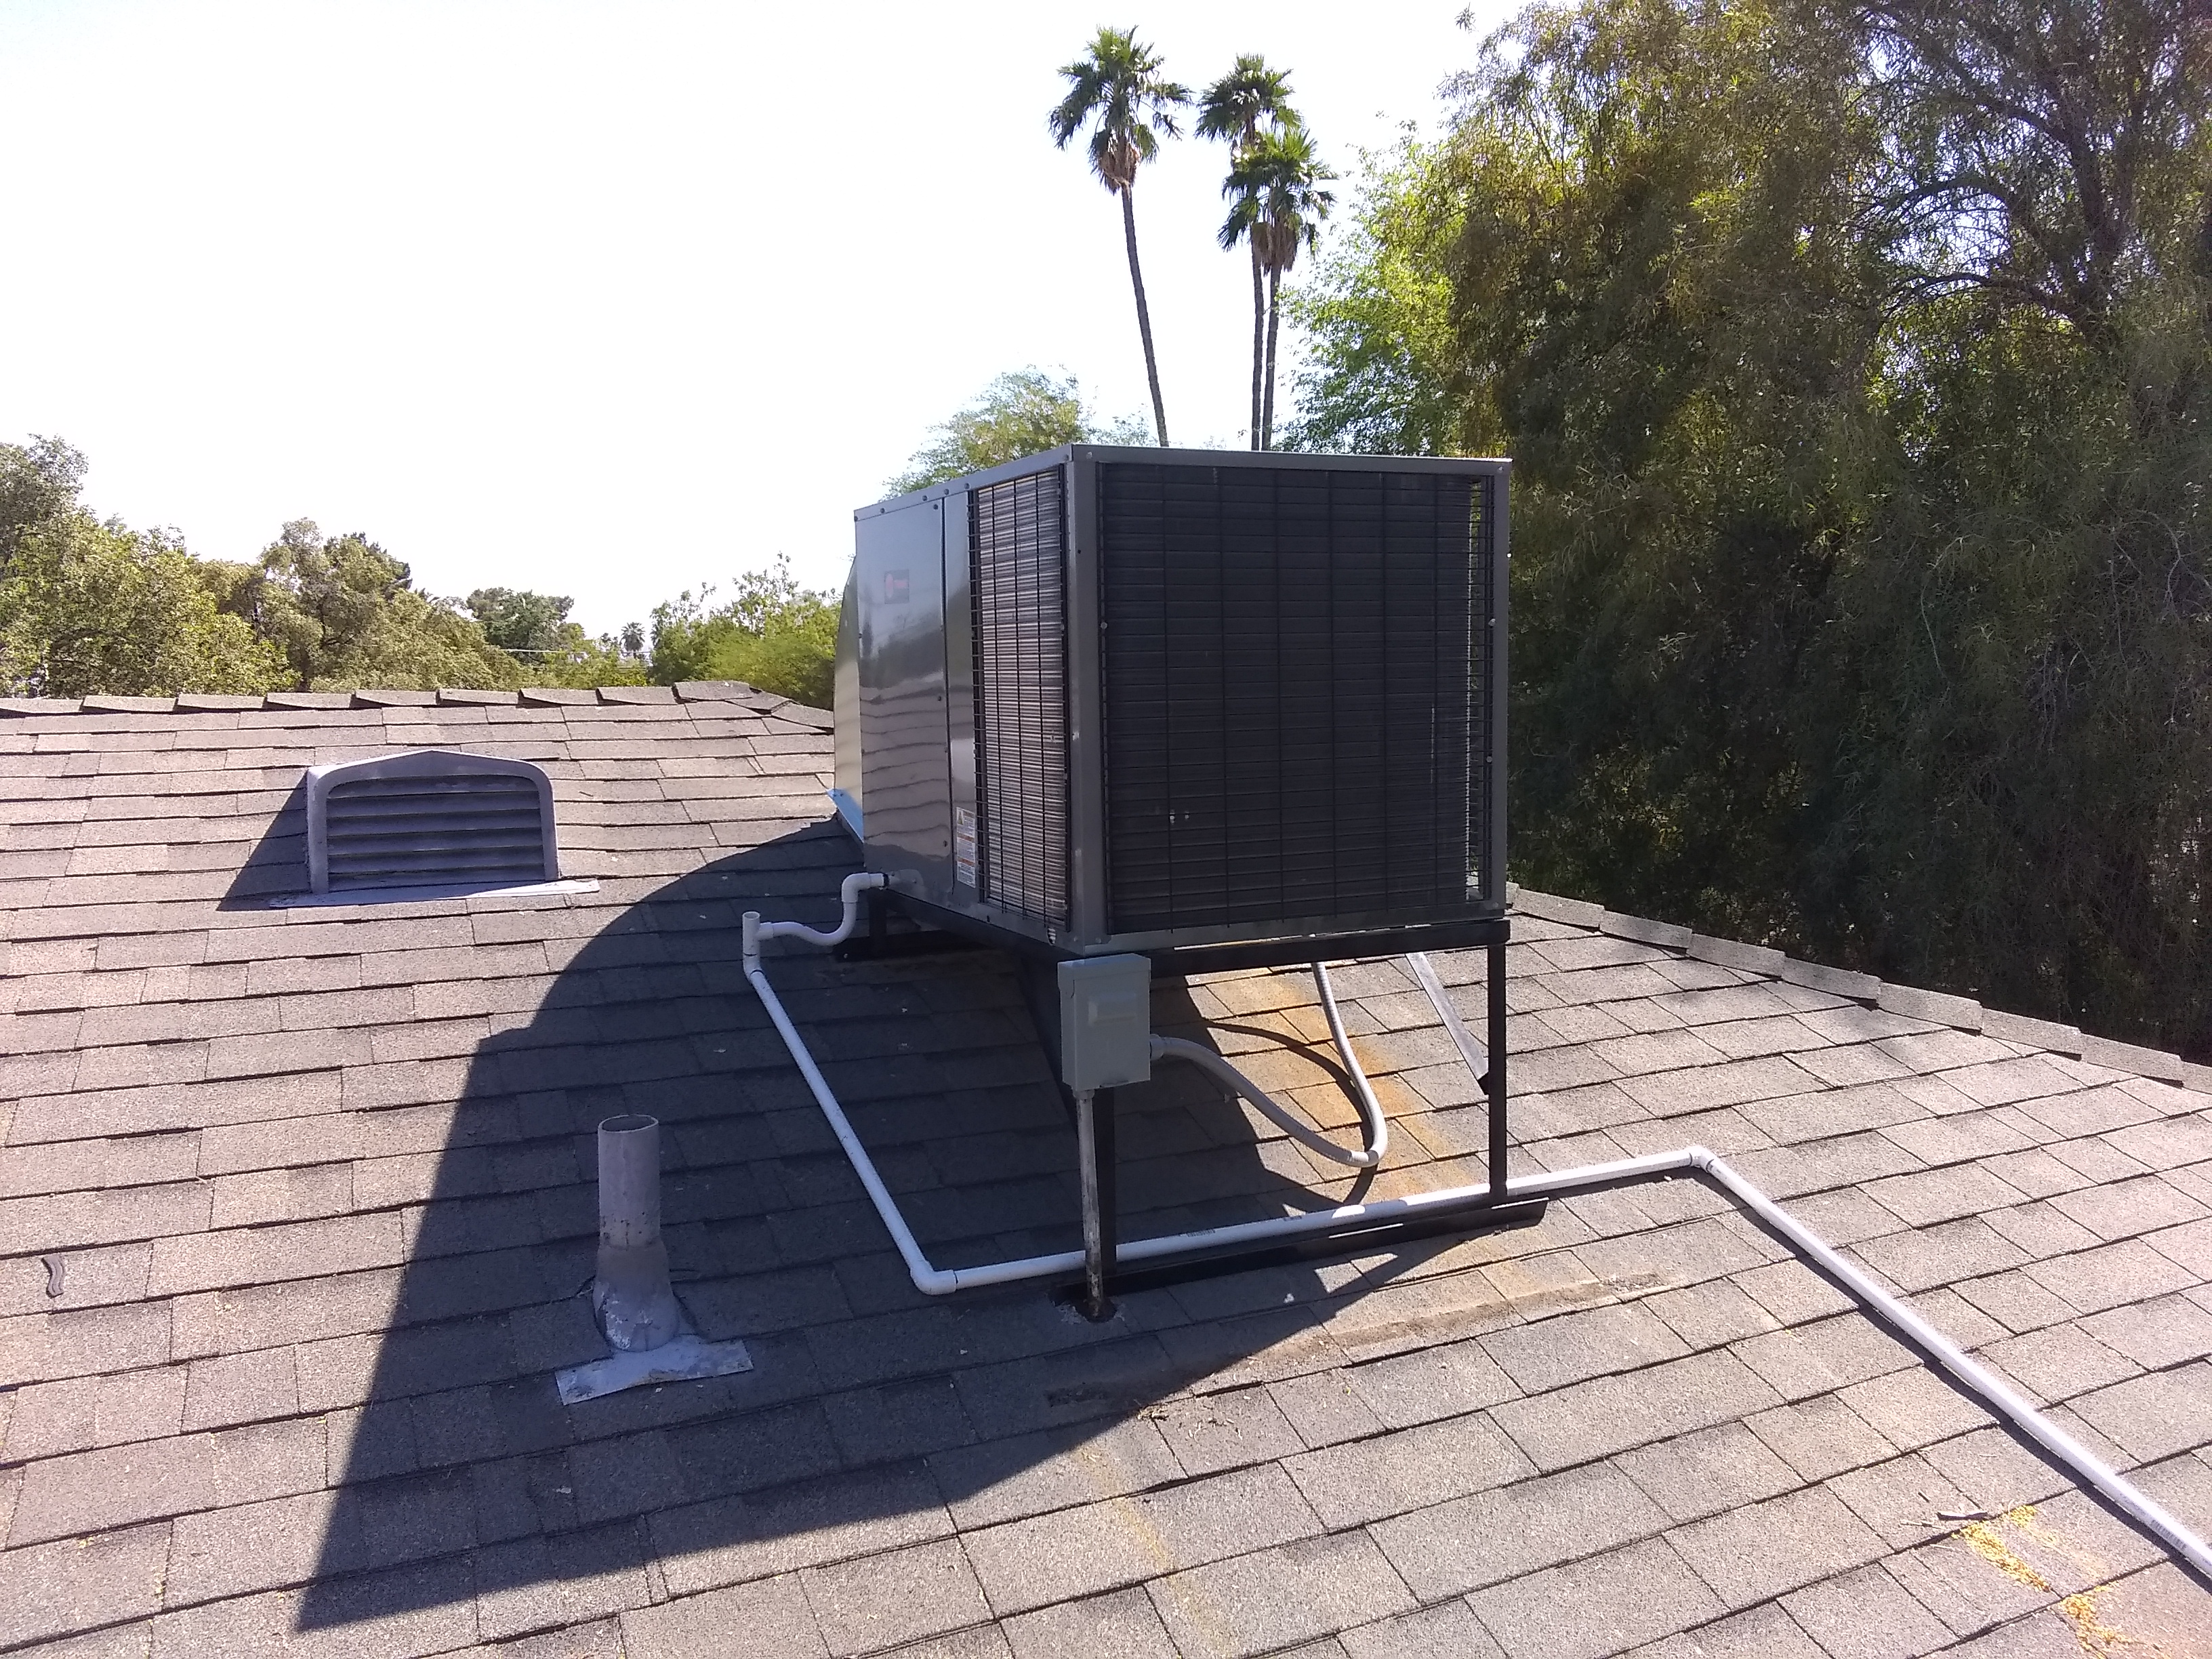 Over / under Trane unit is a great choice for replacing old Goettl units